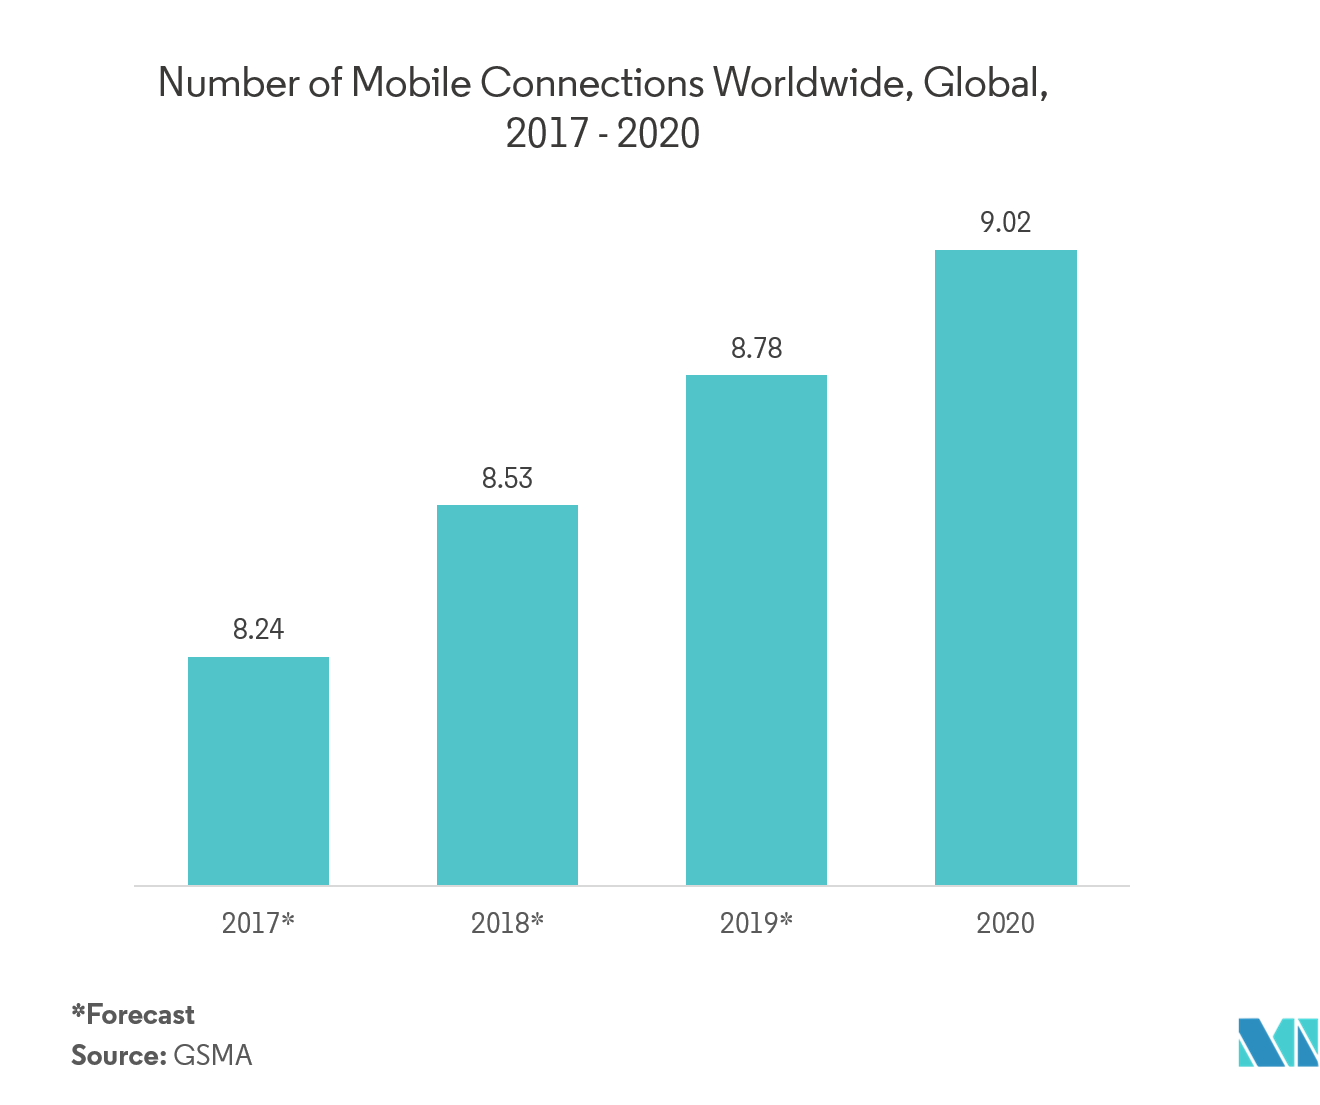 M2M Connections Market Share